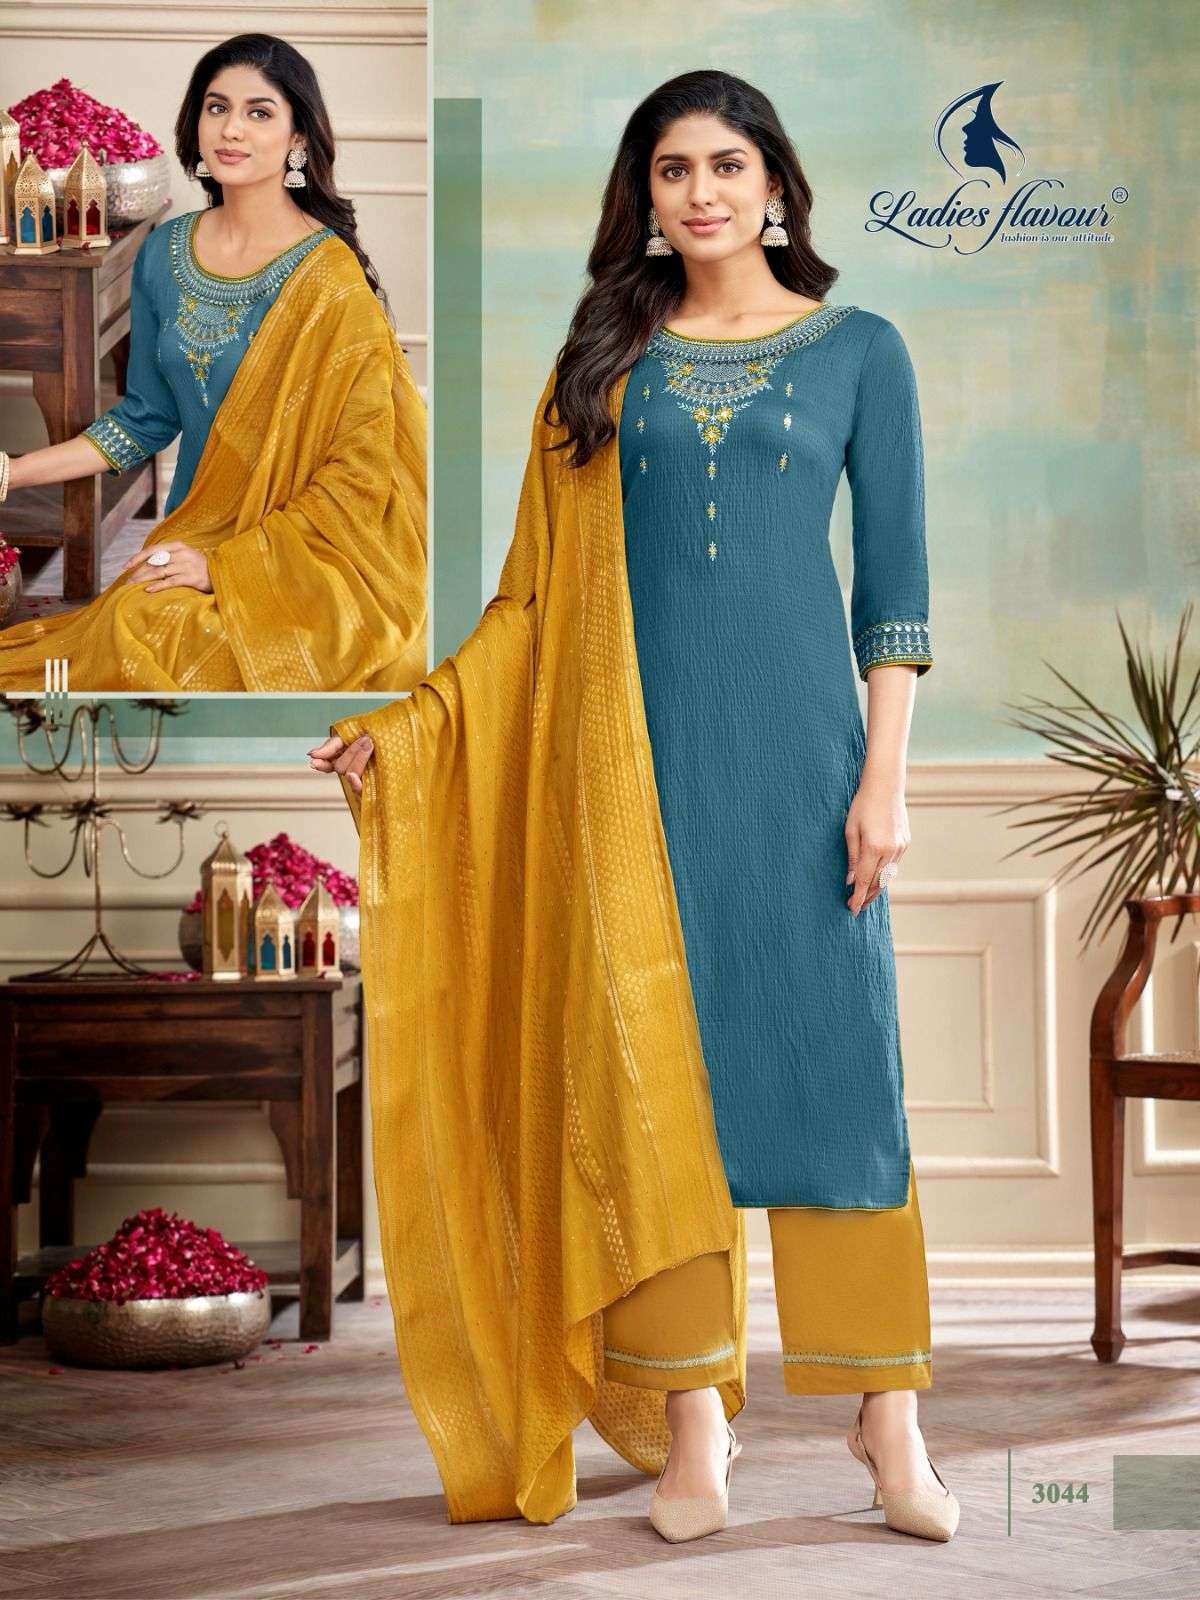 PICK N CHOOSE VISCOSE EMBROIDERY WORK KURTI WITH PLAZZO AND CHANDERI DUPATTA BY LADIES FLAVOUR BRAND...